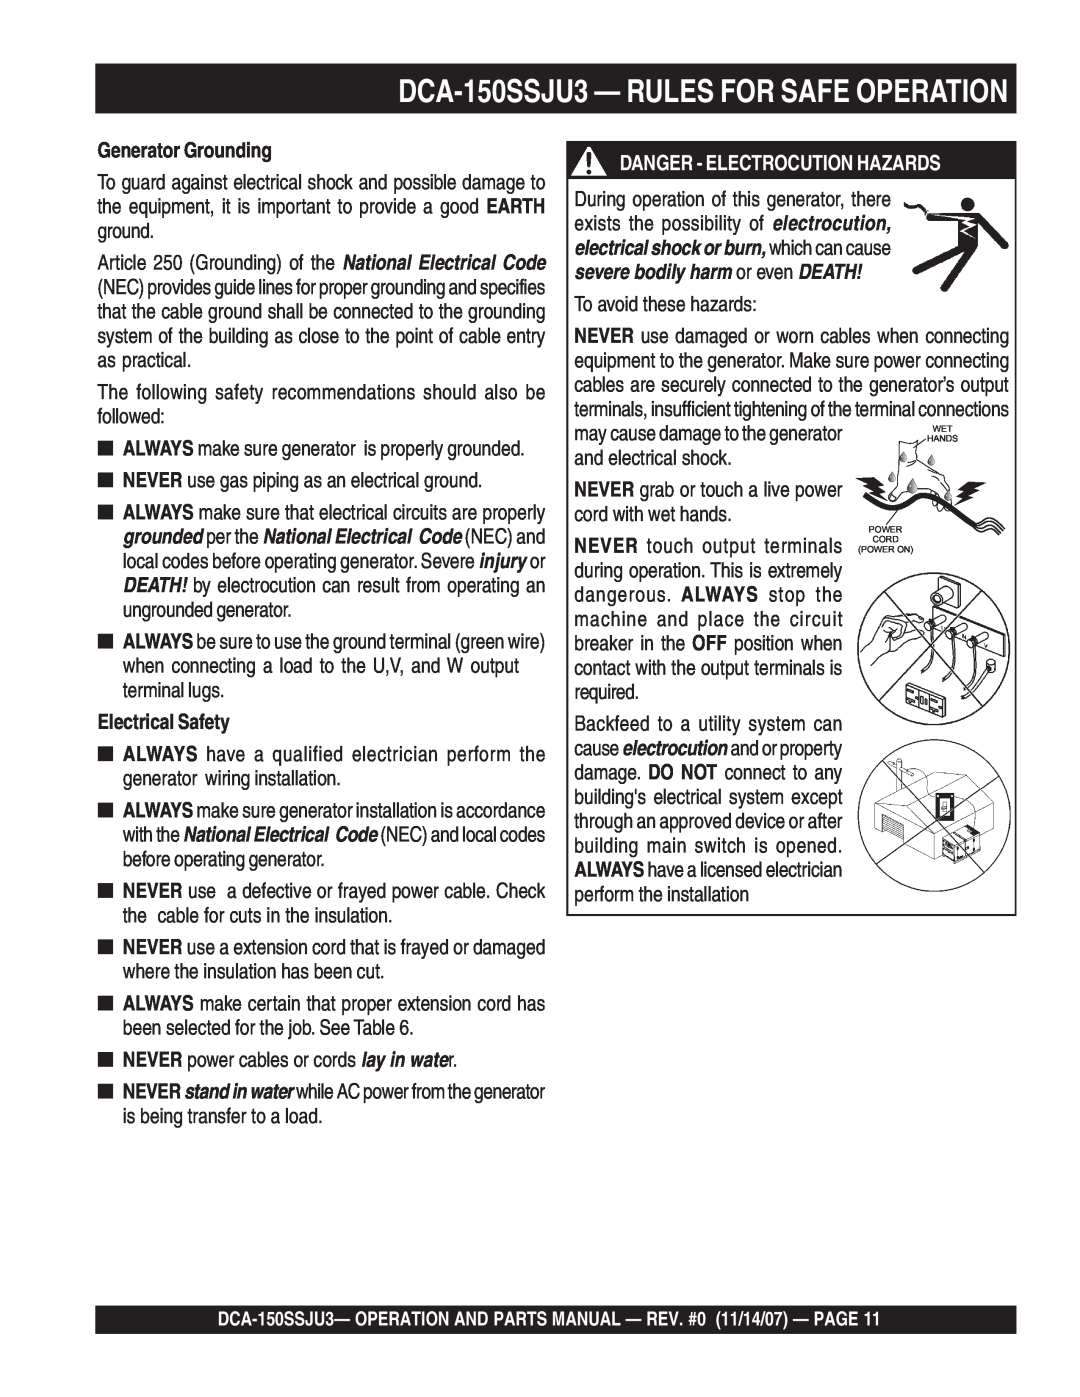 Multiquip operation manual DCA-150SSJU3— RULES FOR SAFE OPERATION, Generator Grounding, Electrical Safety 